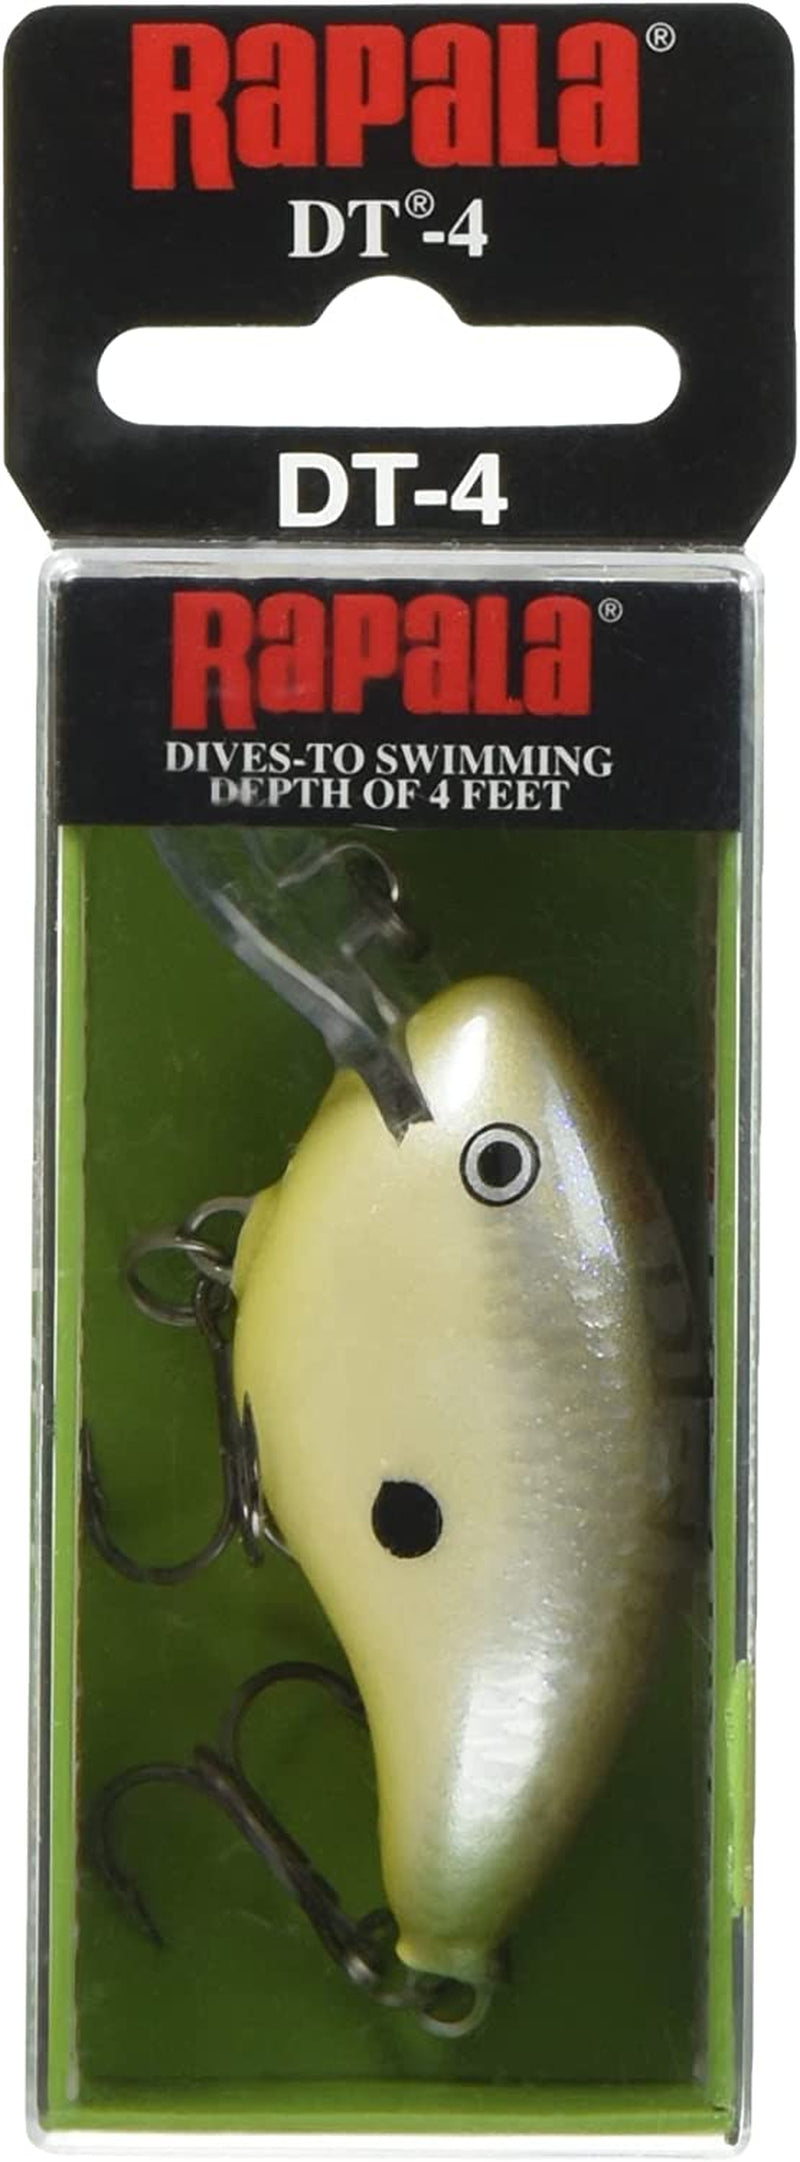 Rapala Rapala Dives to Fishing Lure Sporting Goods > Outdoor Recreation > Fishing > Fishing Tackle > Fishing Baits & Lures Rapala Multi One Size 